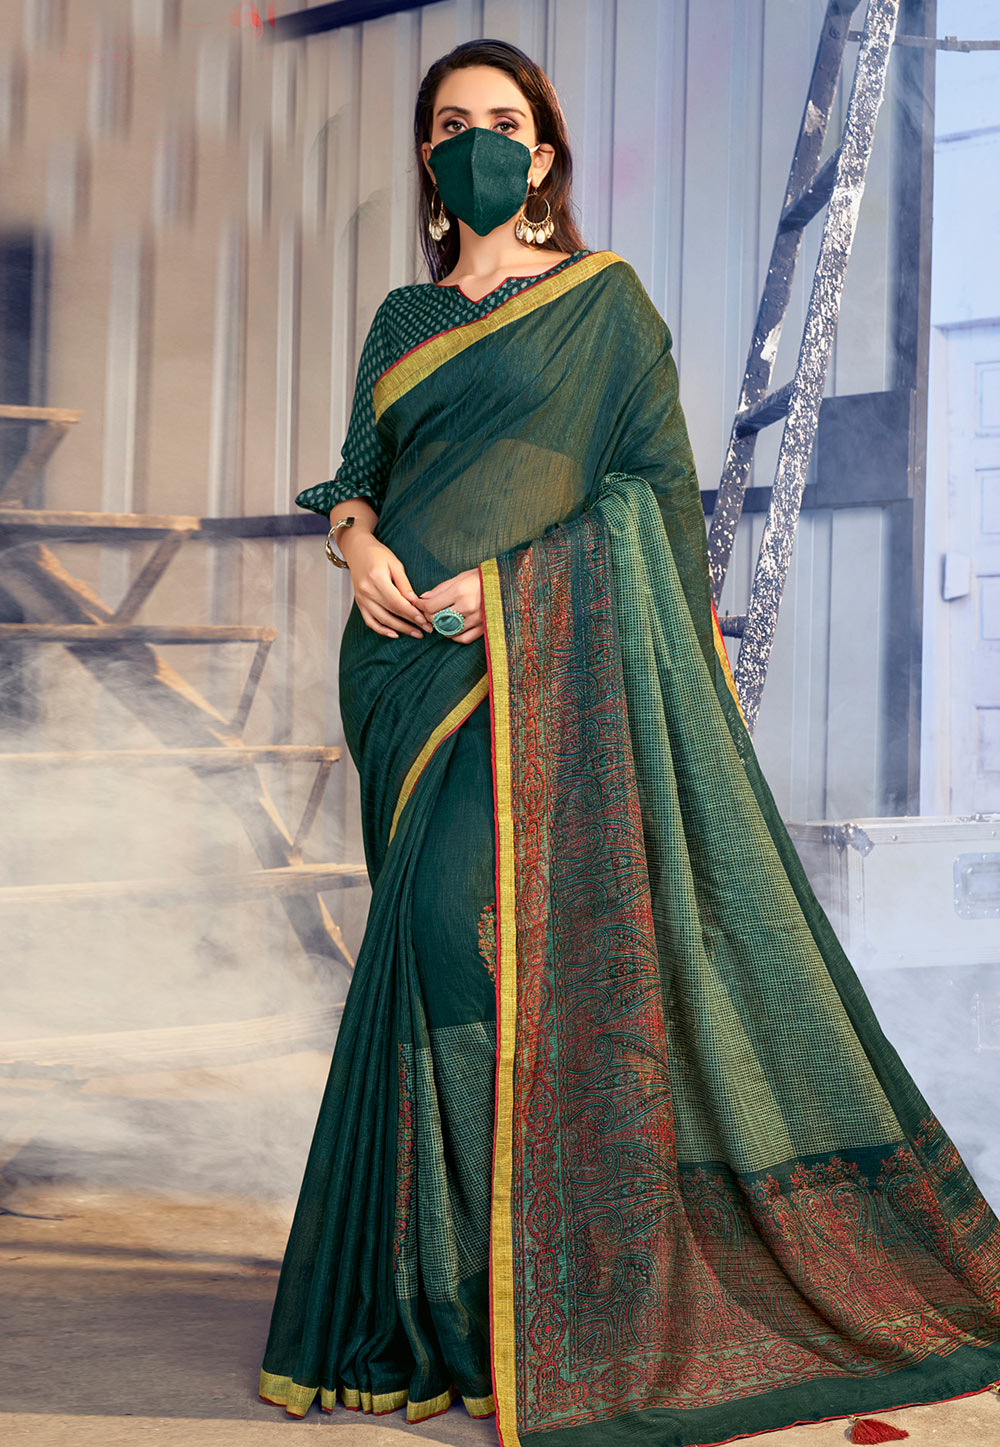 Green Linen Festival Wear Saree With Face Mask 205364